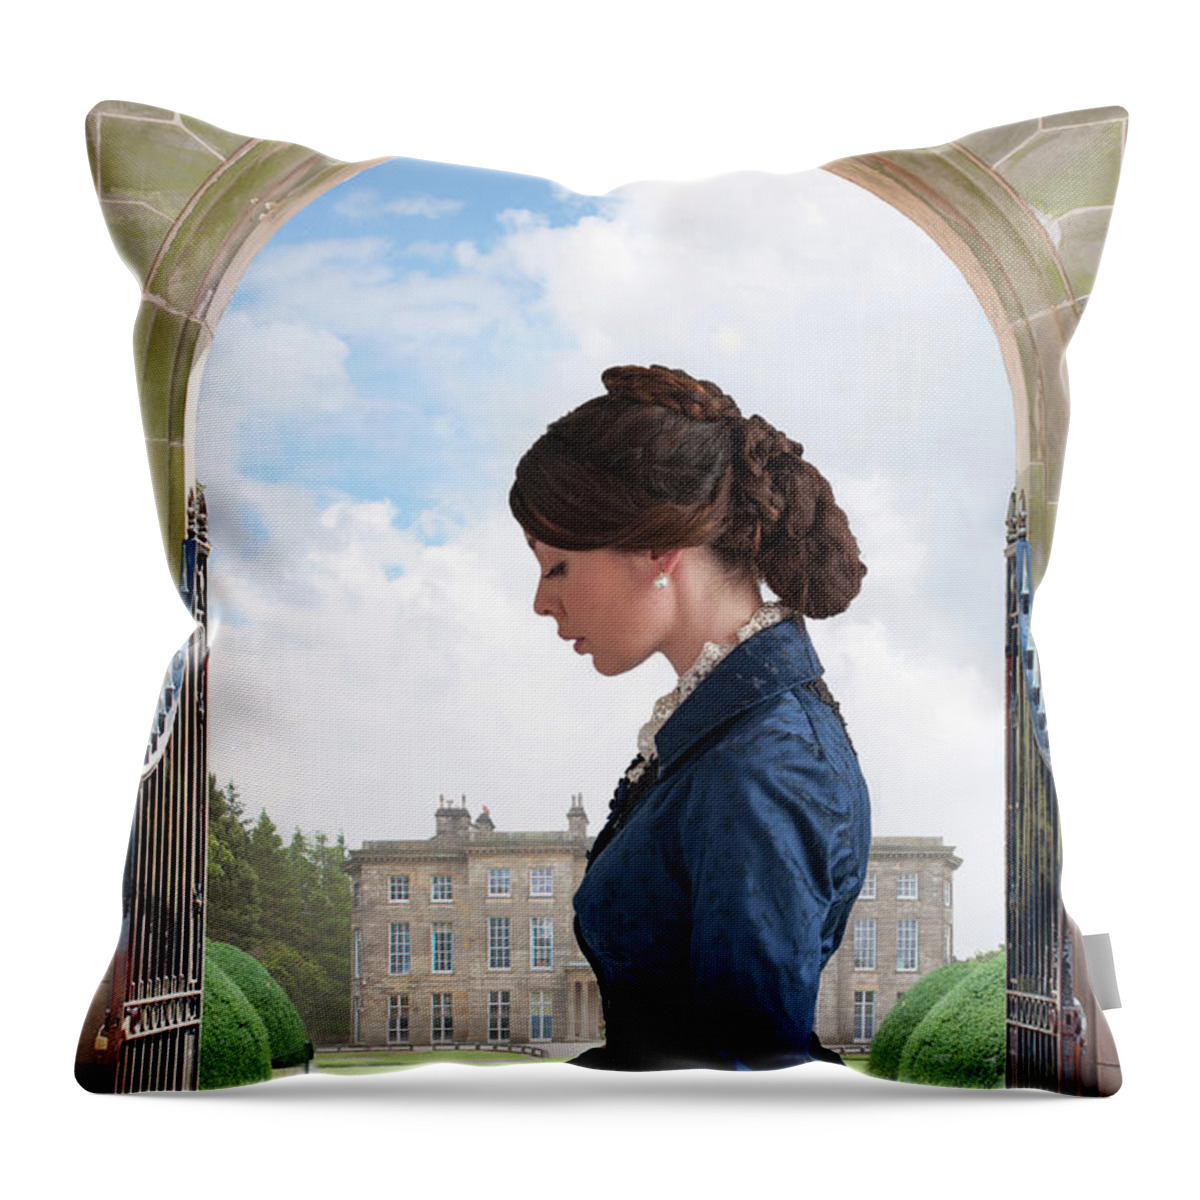 Victorian Throw Pillow featuring the photograph Victorian Woman In Profile by Lee Avison